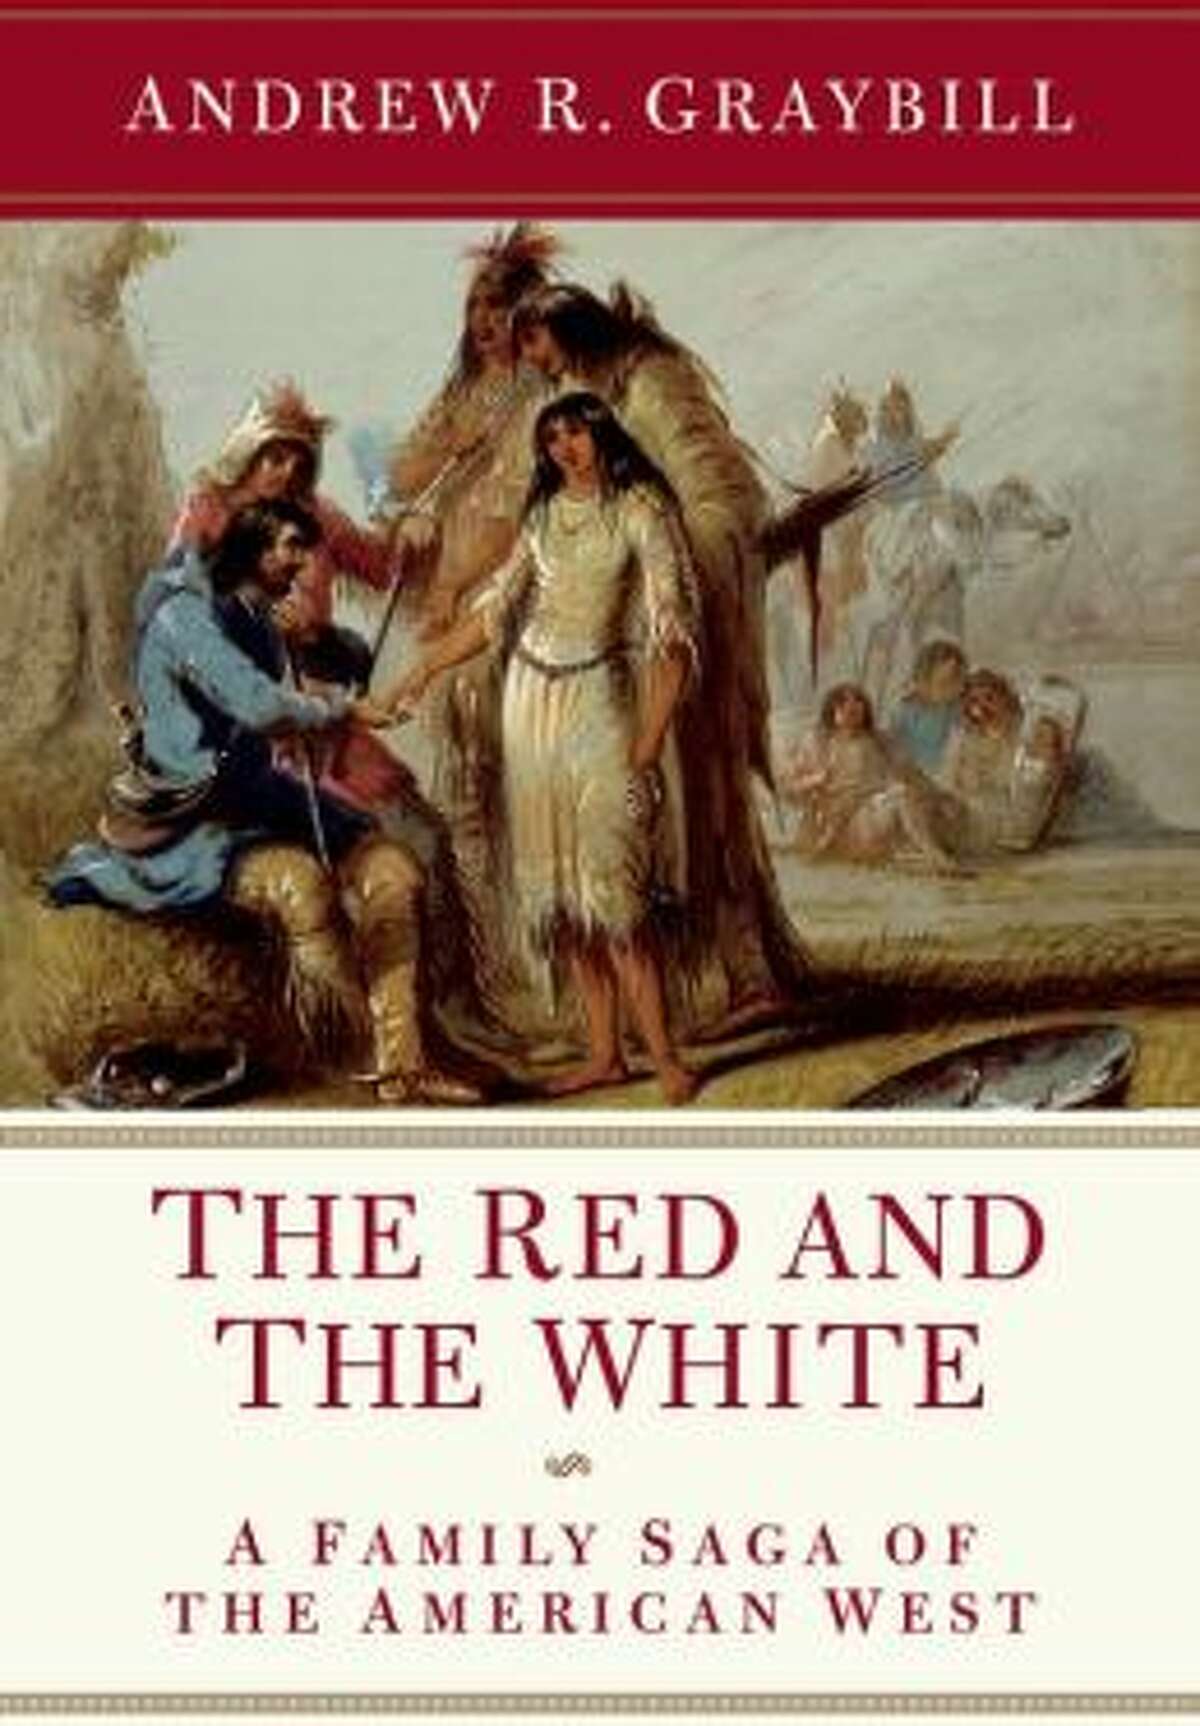 "The Red and the White" by Andrew Graybill